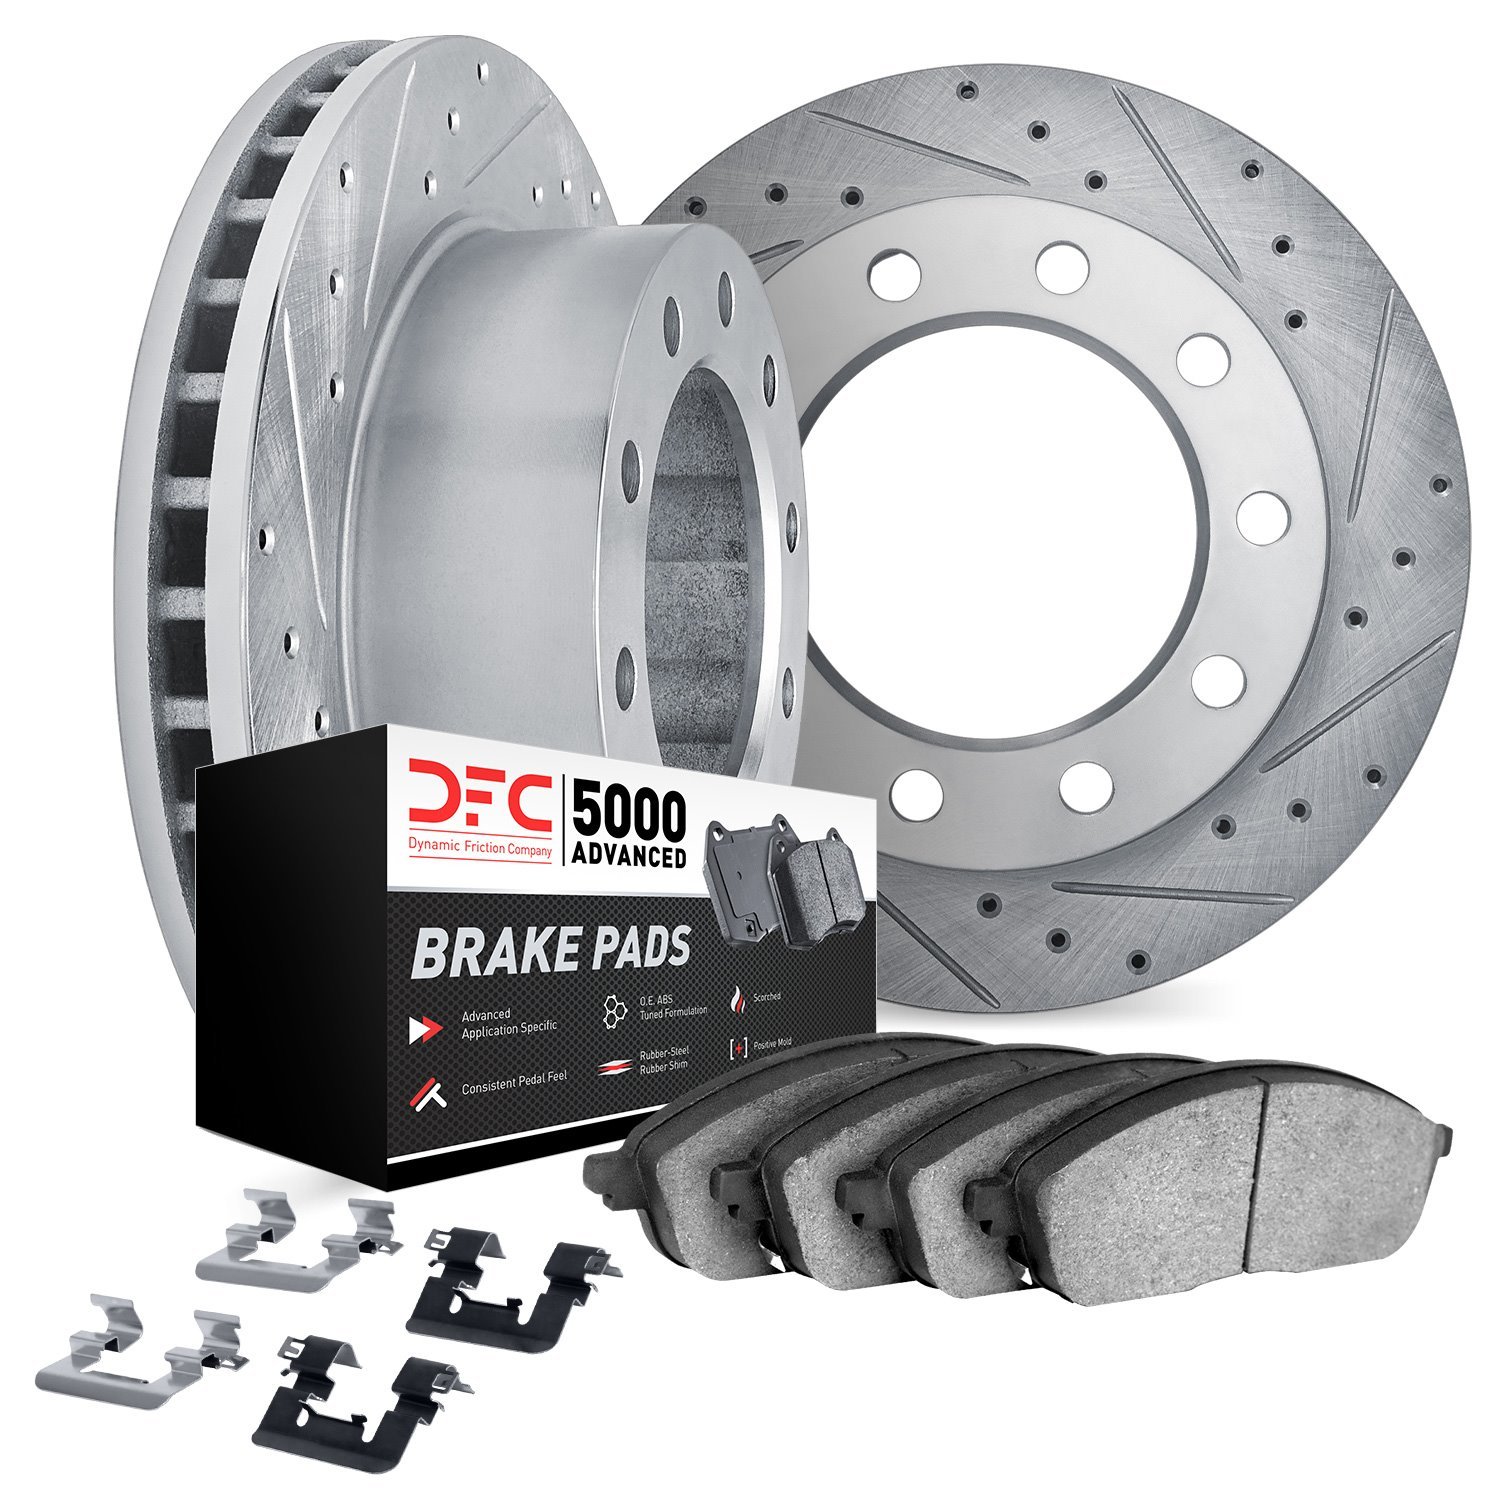 7512-99765 Drilled/Slotted Brake Rotors w/5000 Advanced Brake Pads Kit & Hardware [Silver], Fits Select Ford/Lincoln/Mercury/Maz